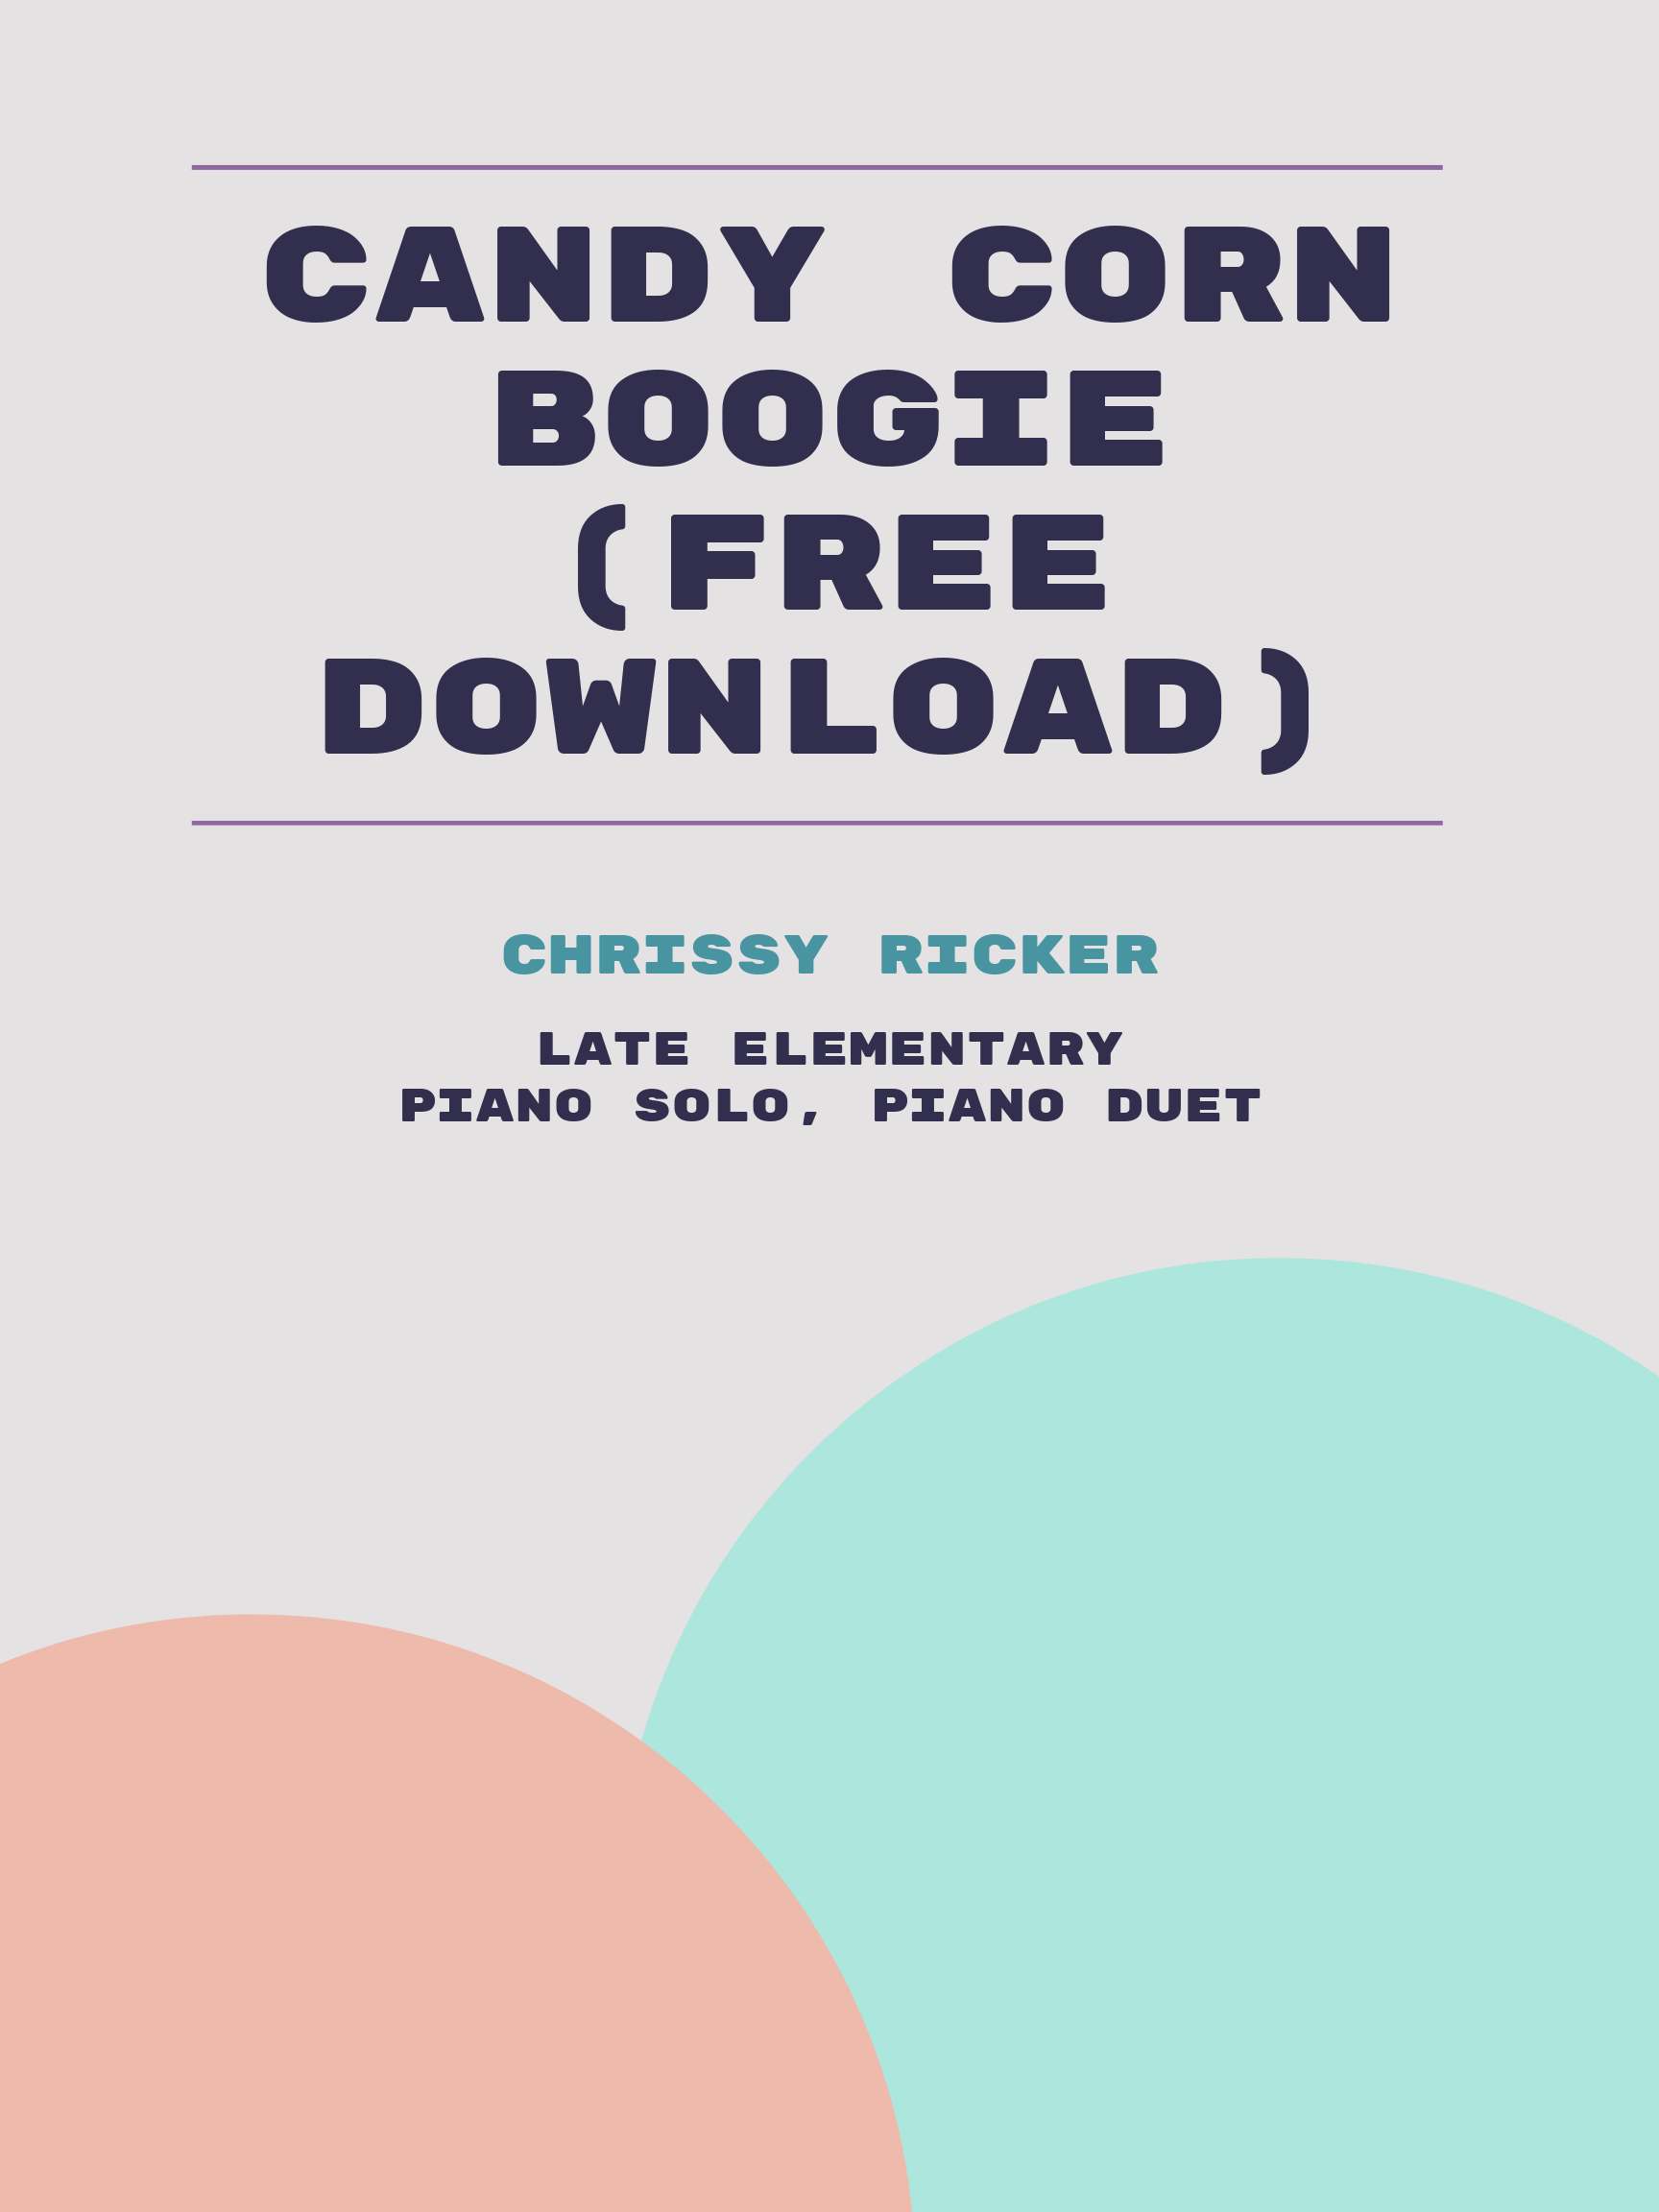 Candy Corn Boogie (Free Download) by Chrissy Ricker